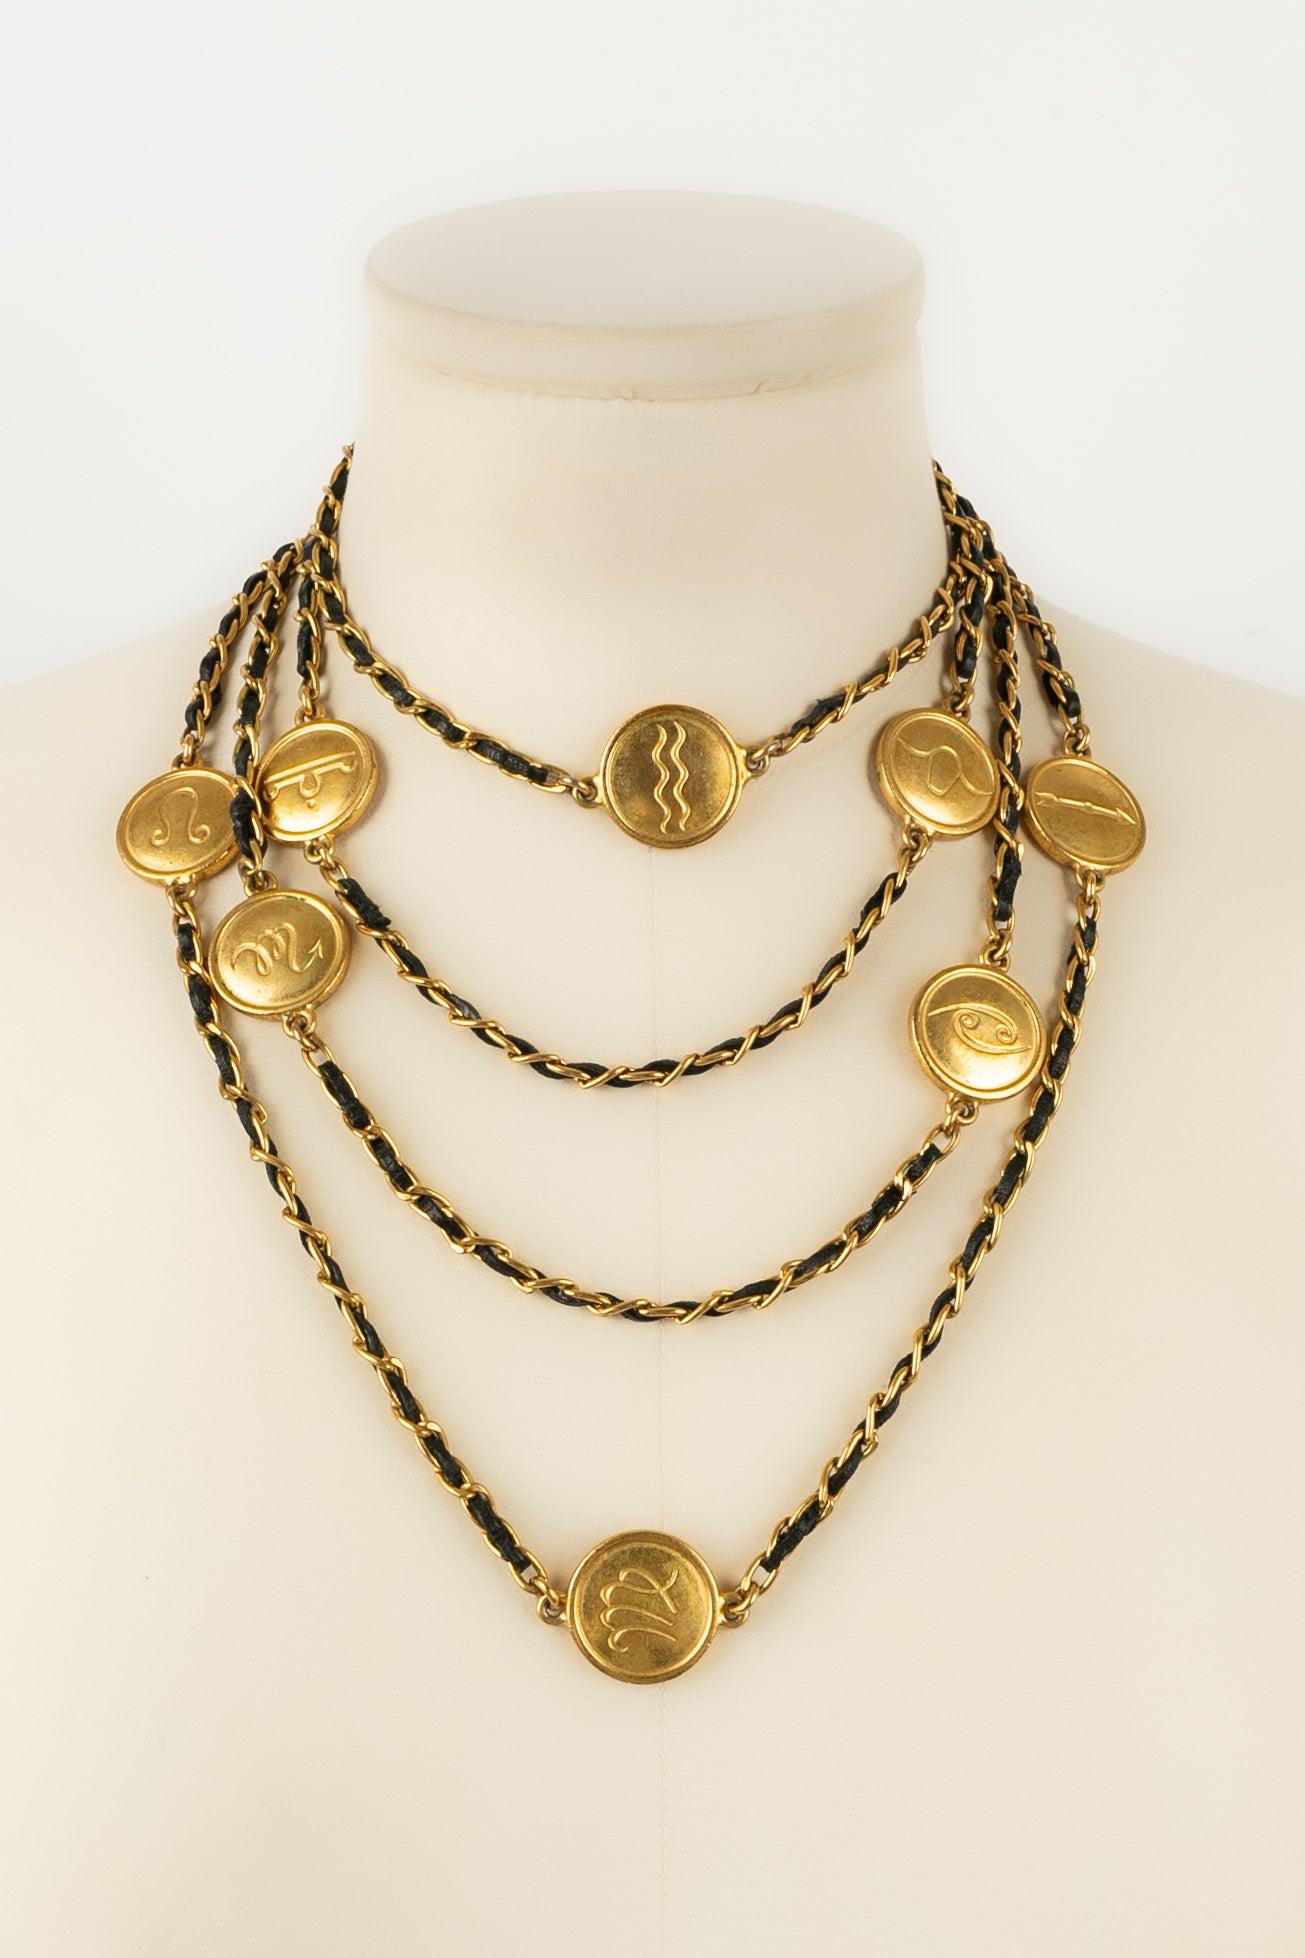 Chanel Necklace / Sautoir in Gold-Plated Metal, 1995 For Sale 1